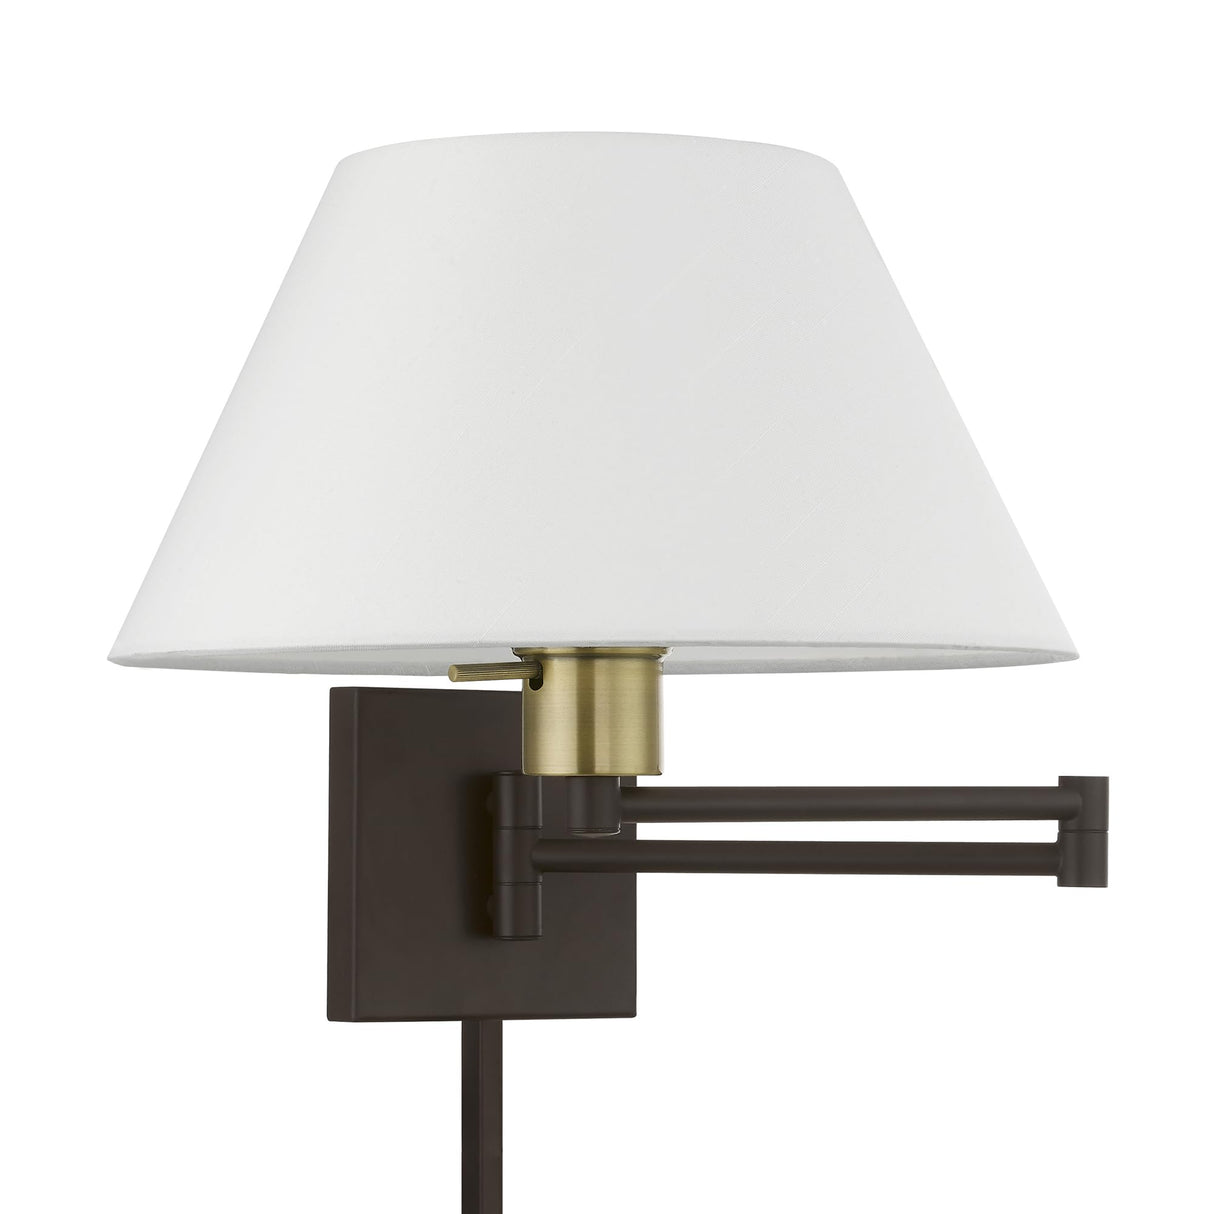 Livex Lighting 40039-07 Swing Arm Wall Lamps Collection 1 Light with Accent Swing Arm Wall Lamp, Brass